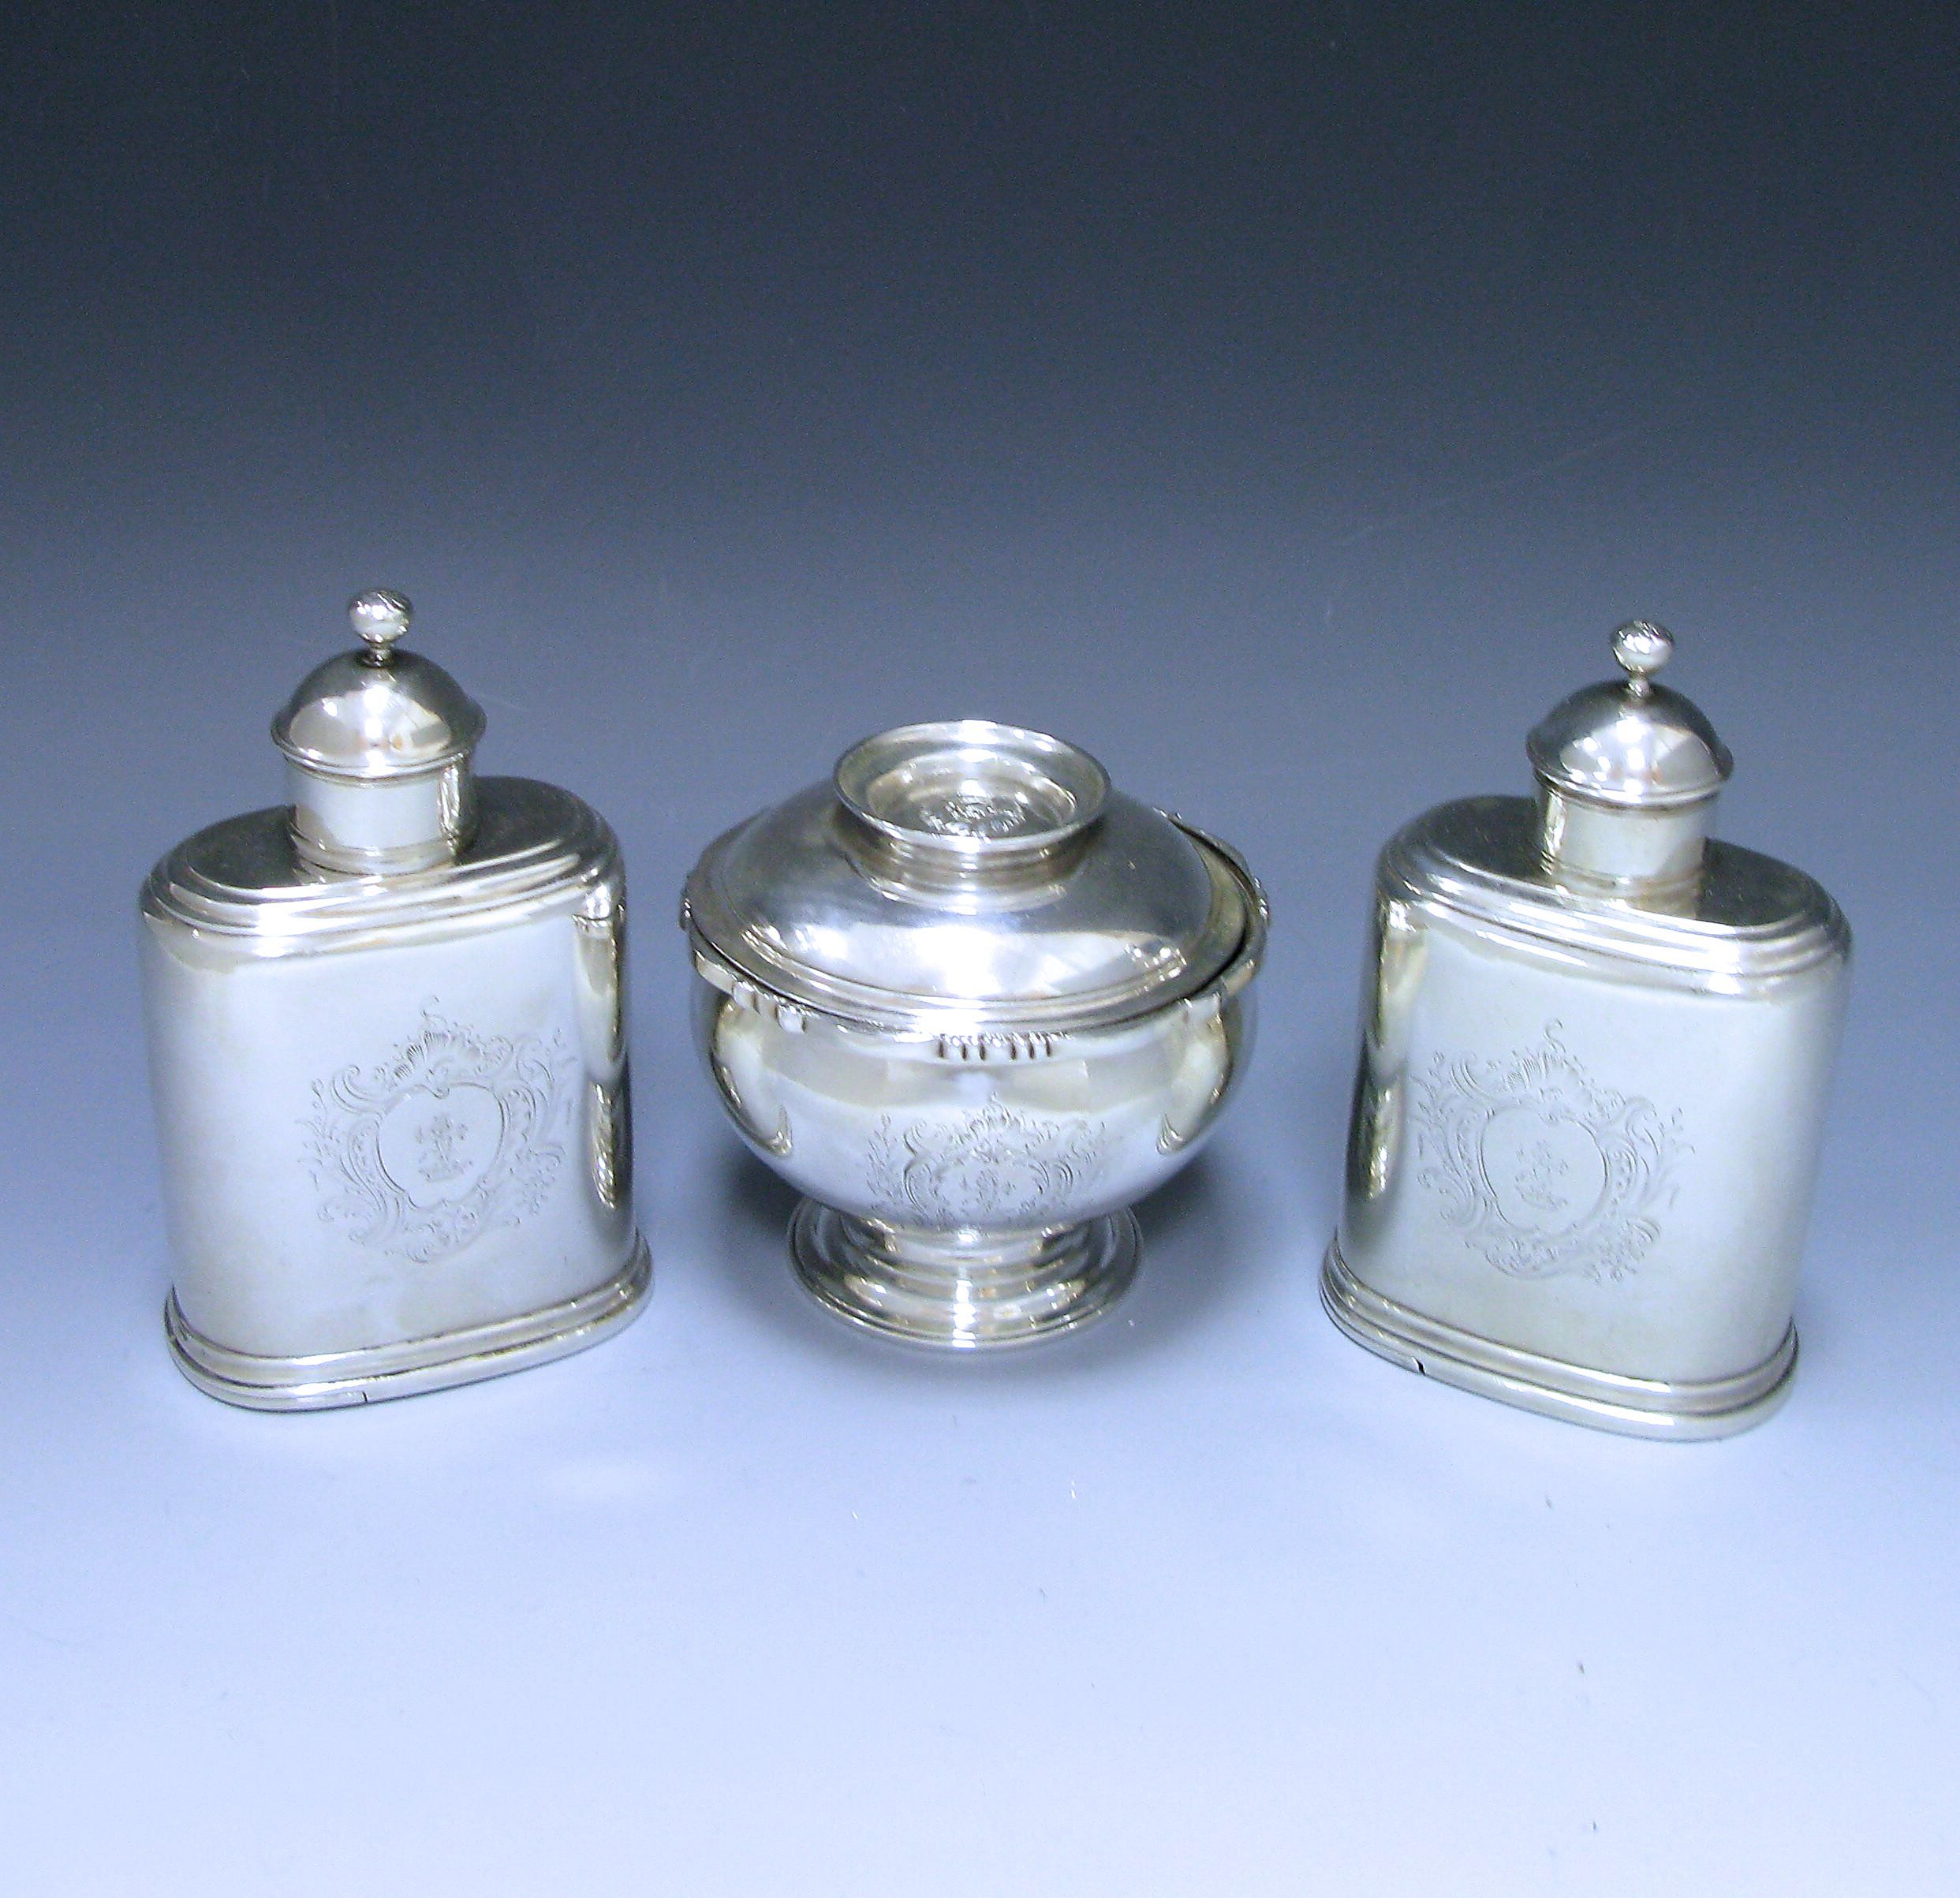 Antique Covered Bowl and Tea Caddies 1